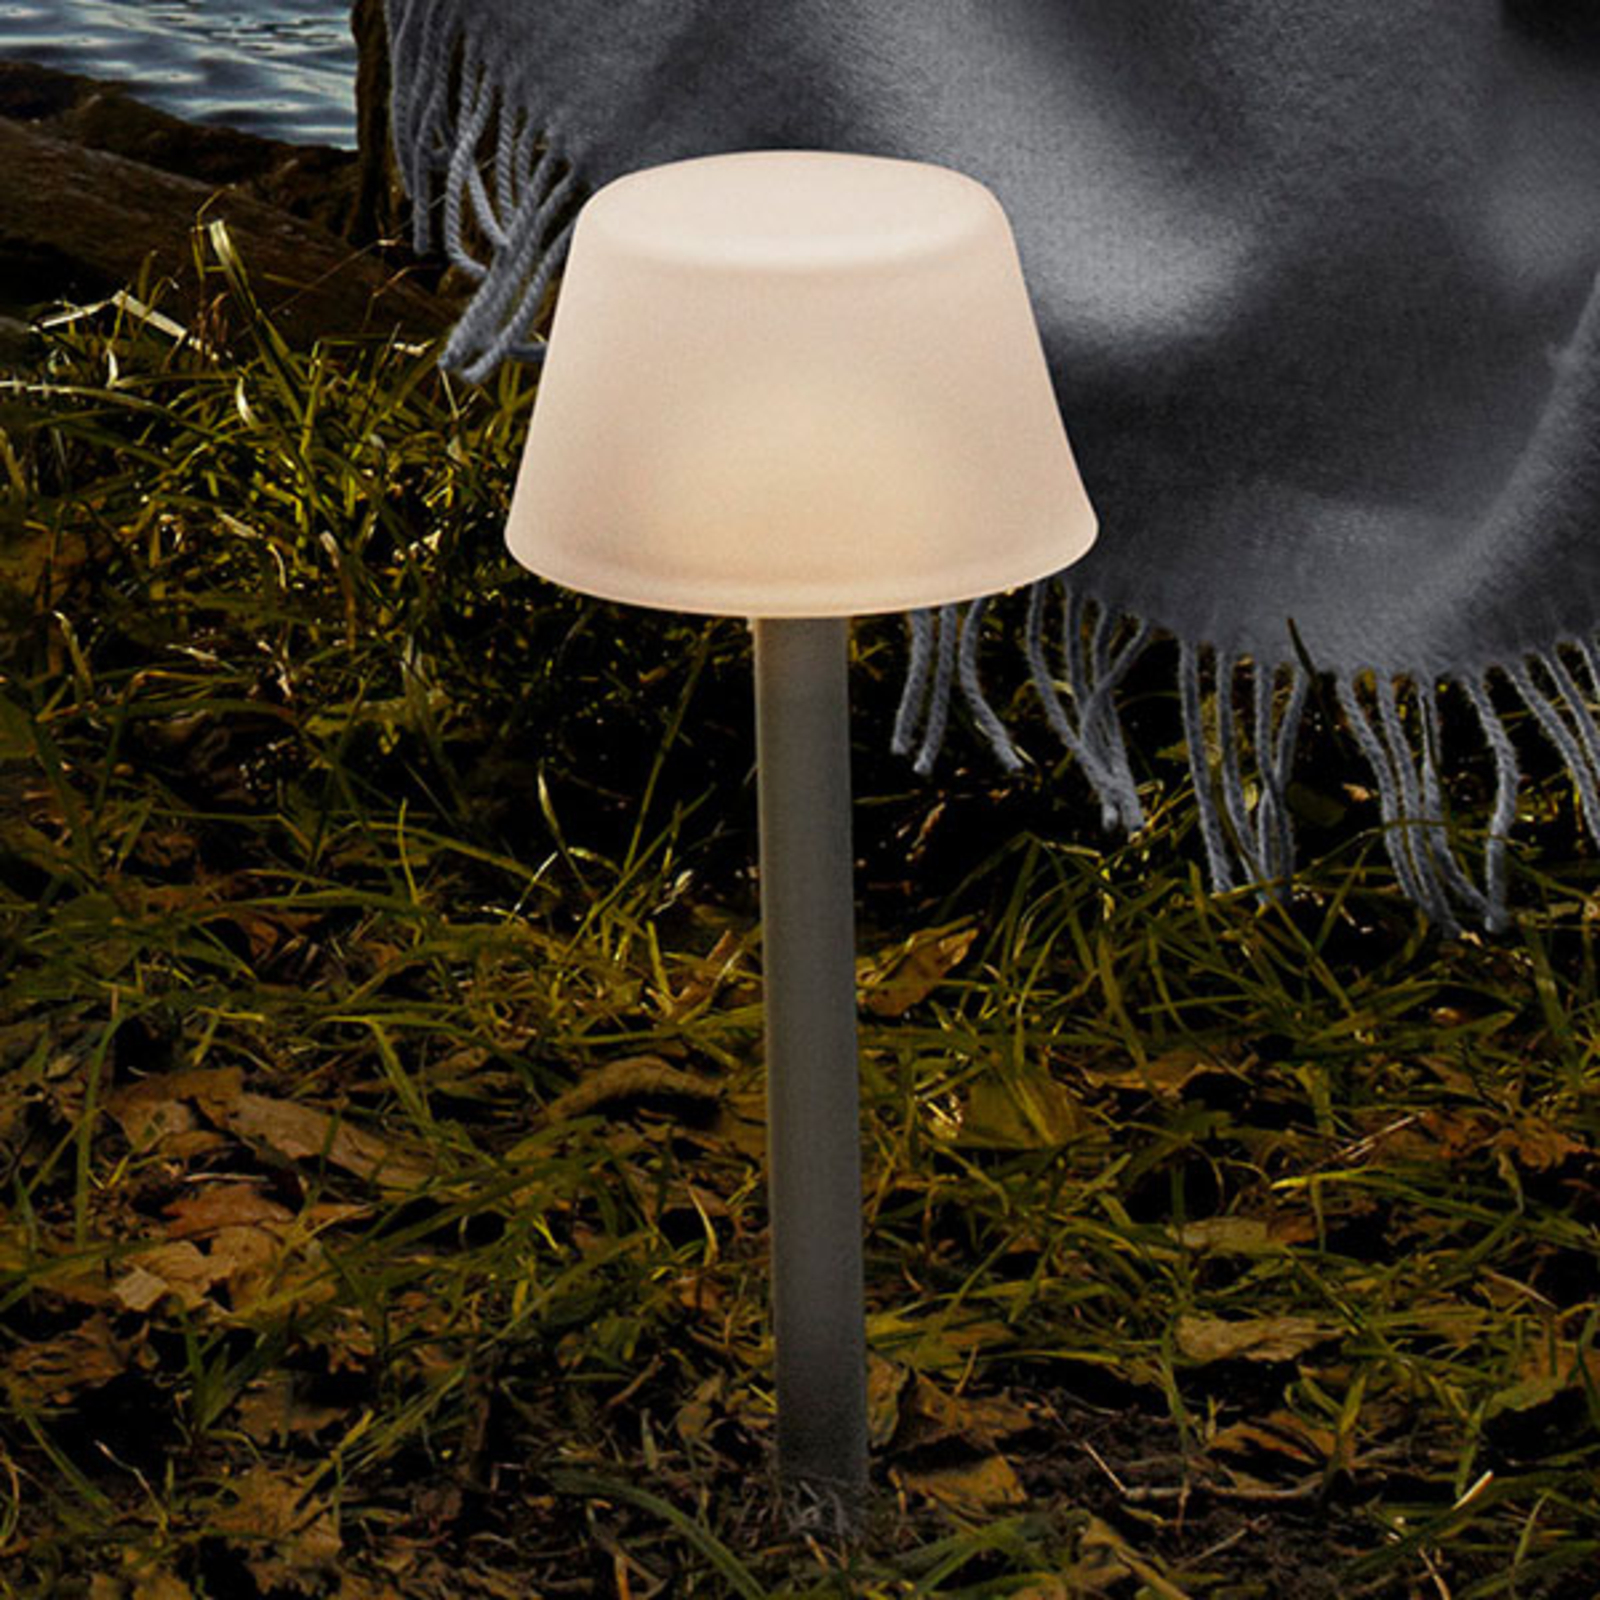 Eva Solo SunLight solar-grondspies lamp, frosted